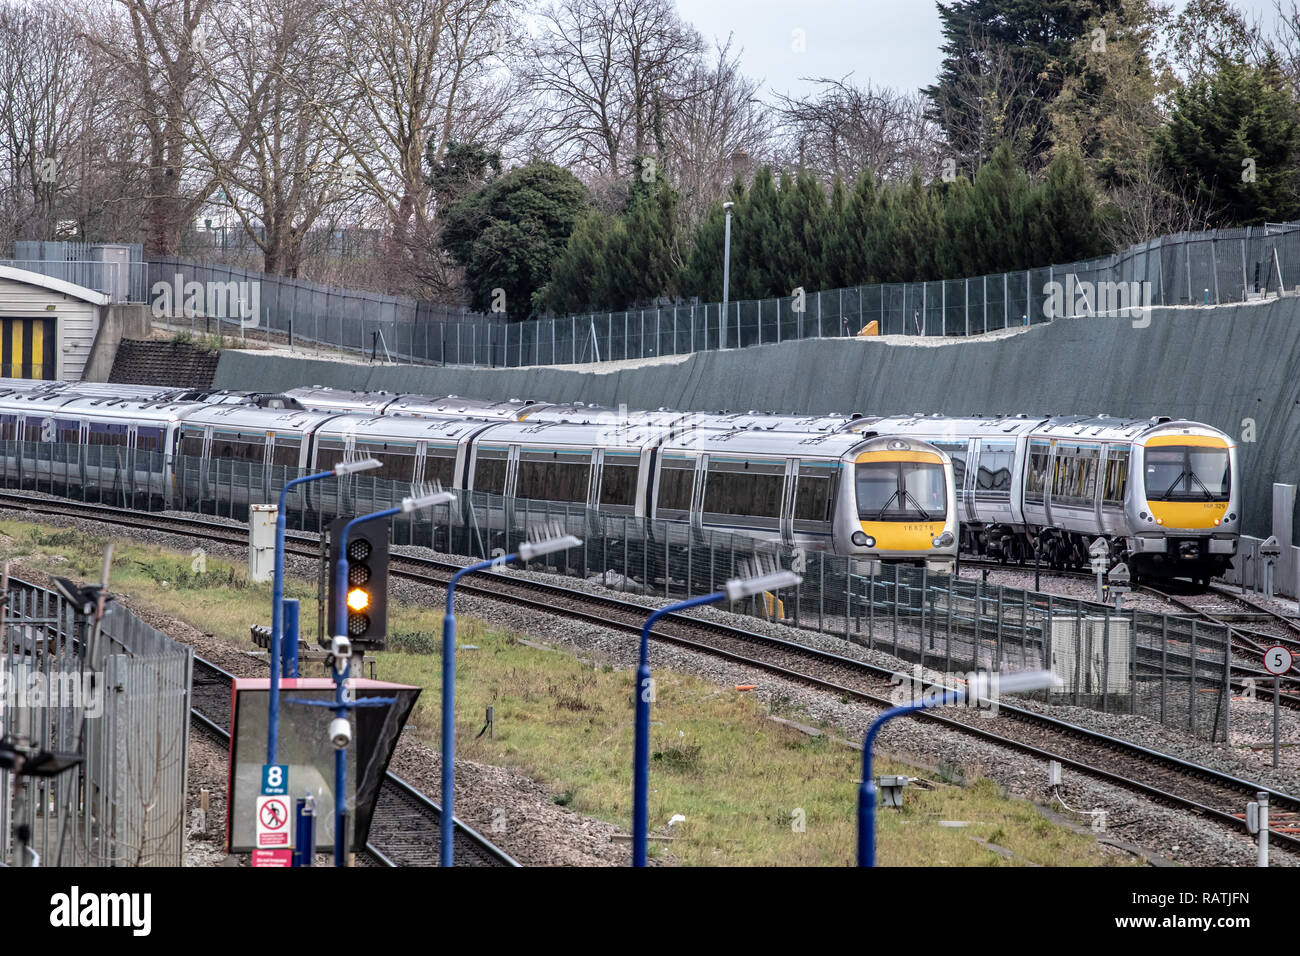 Trains Parked in Sidings at Wembley Stadium Station Stock Photo